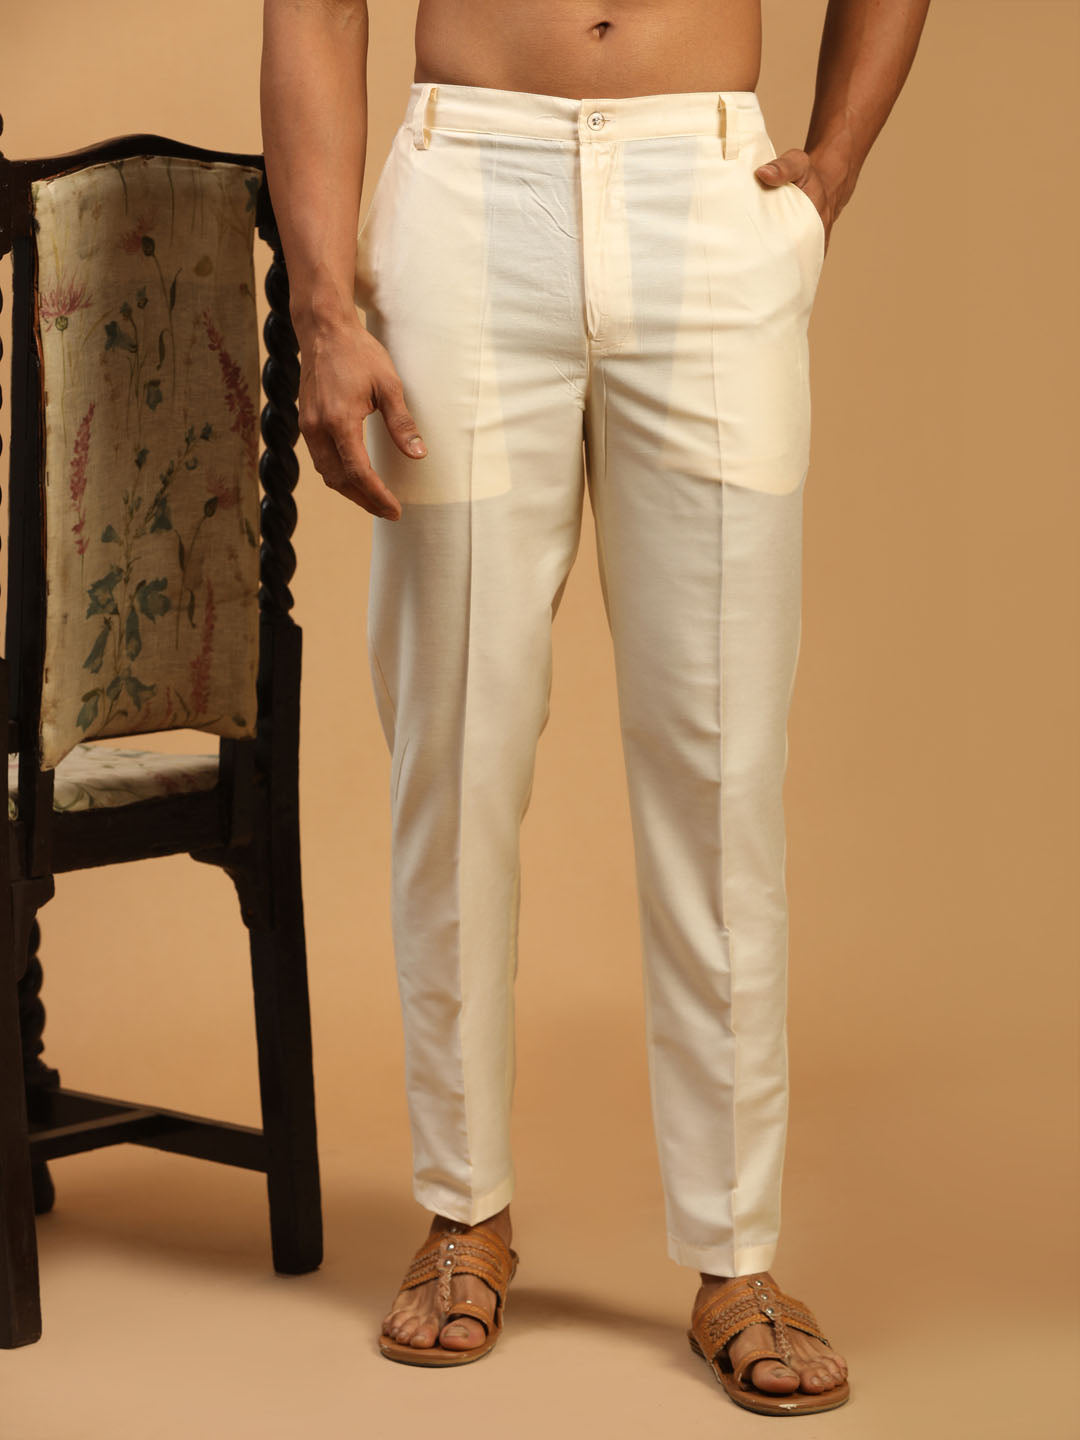 BoStreet Women Cream-Coloured Loose Fit Cargos Trousers Price in India,  Full Specifications & Offers | DTashion.com